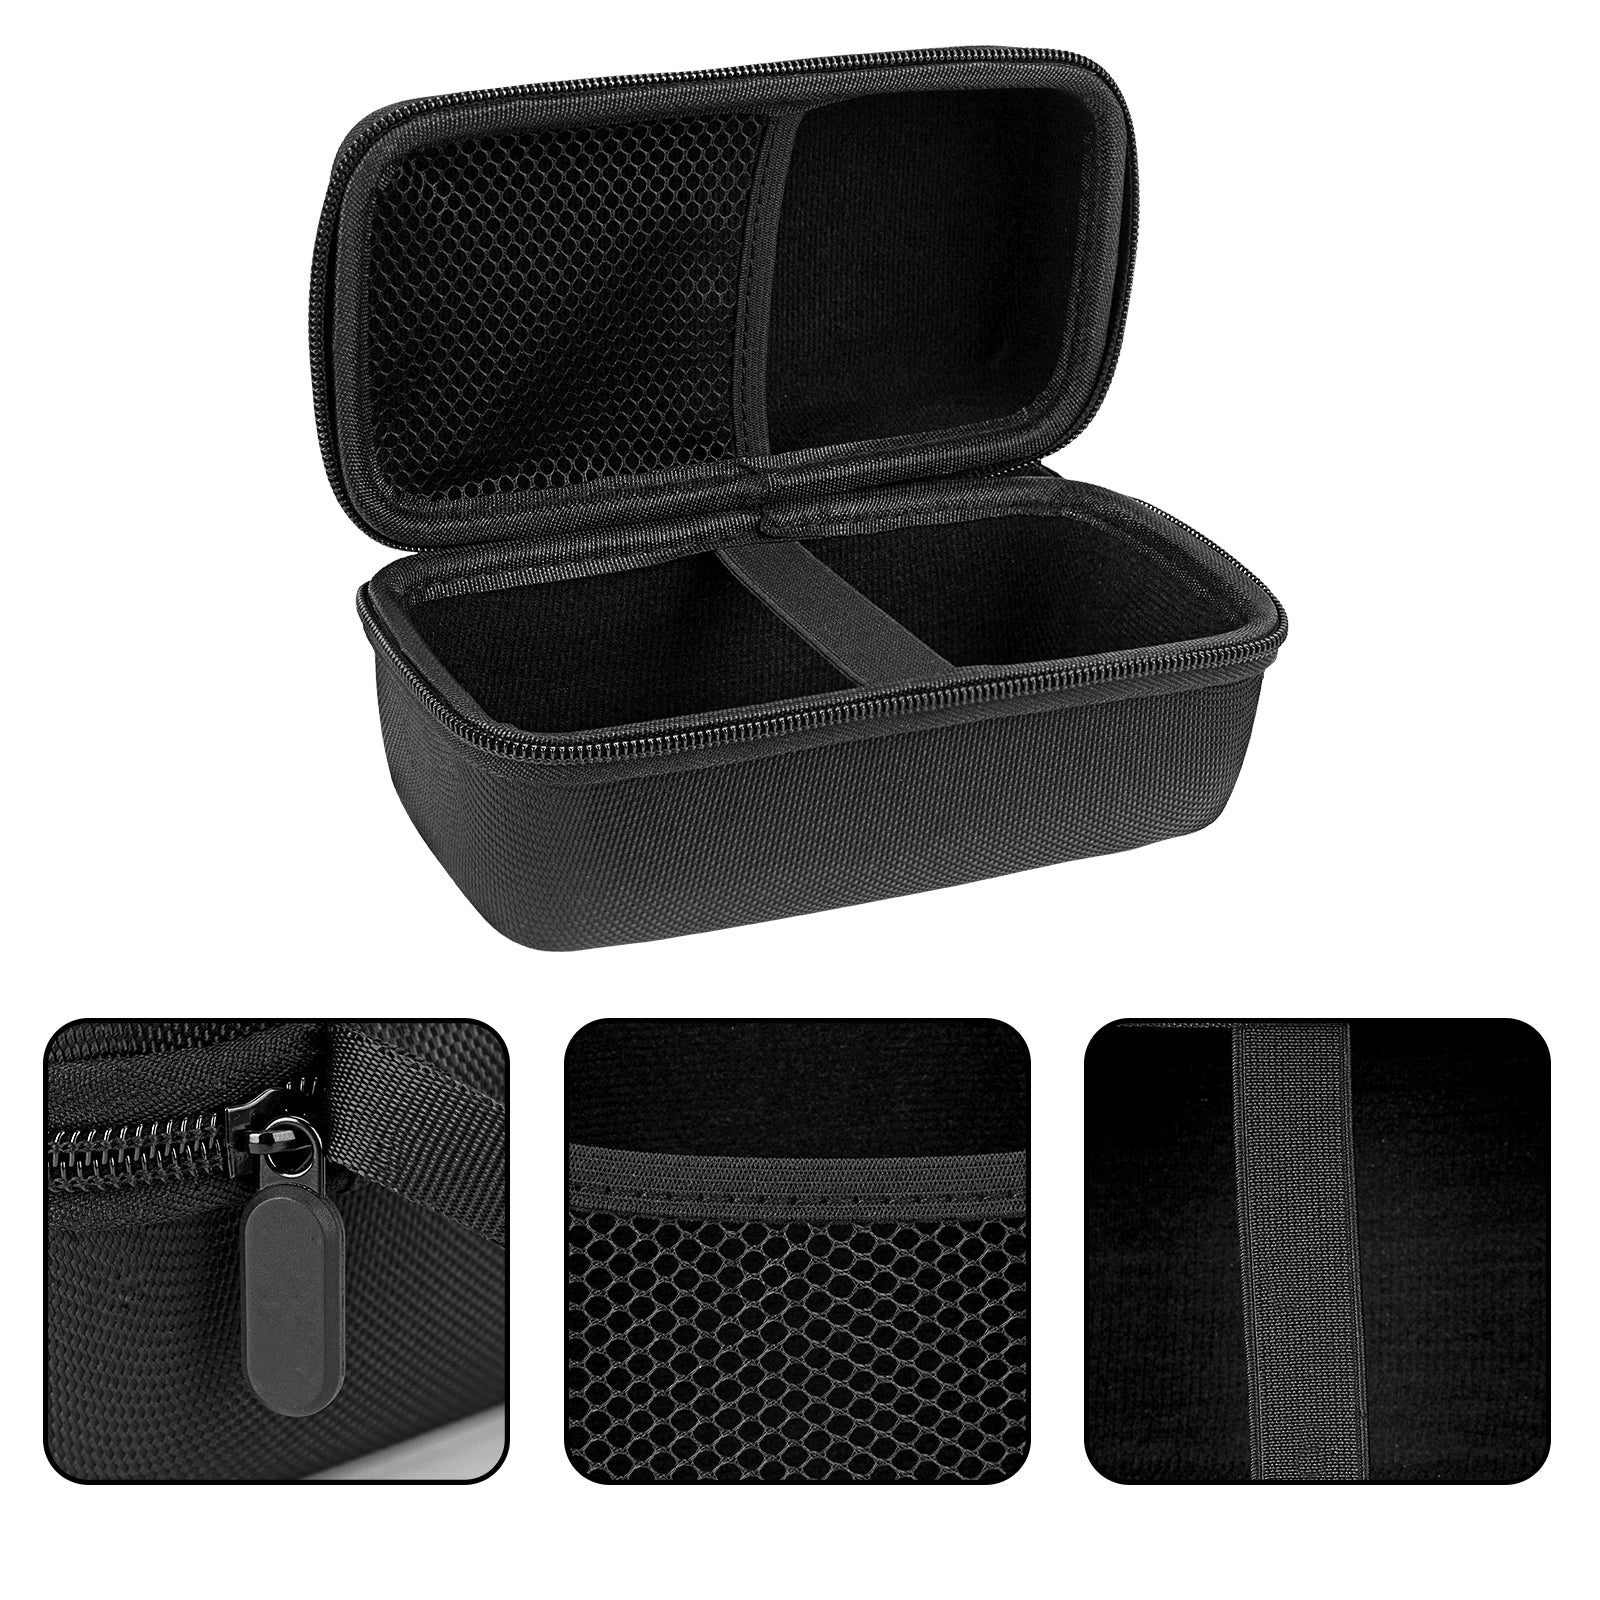 Geekria Nylon Speaker Case Cover, Compatible with Marshall Emberton II